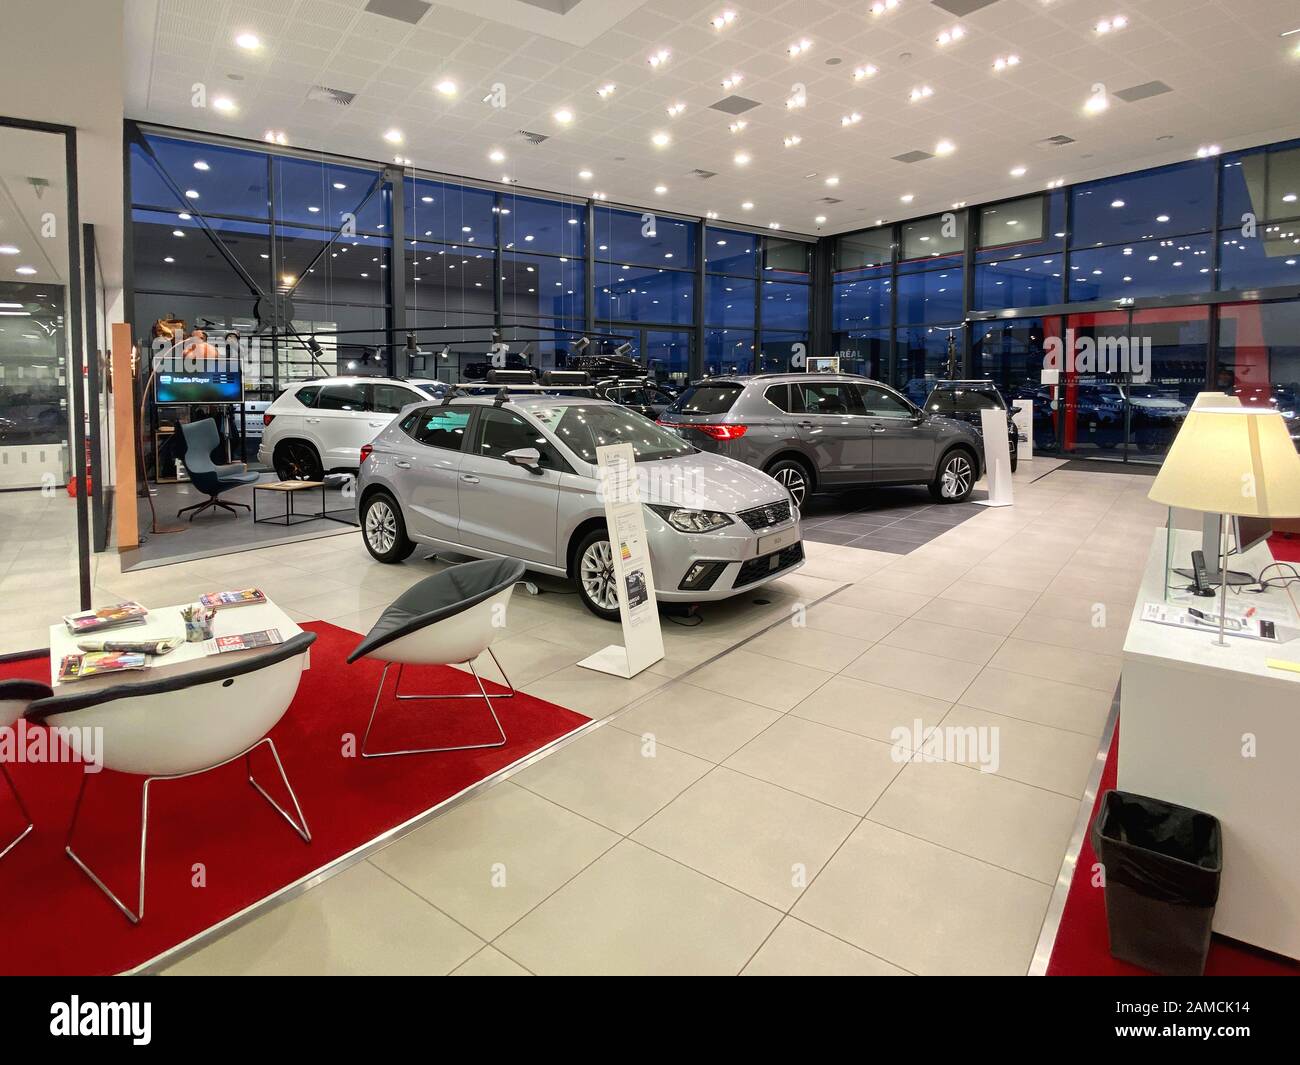 Paris, France - Oct 25, 2019: Wide angle view of empty car dealership showroom interior with multiple Seat Cars inside and focus on black Silver Ibiza four door model Stock Photo